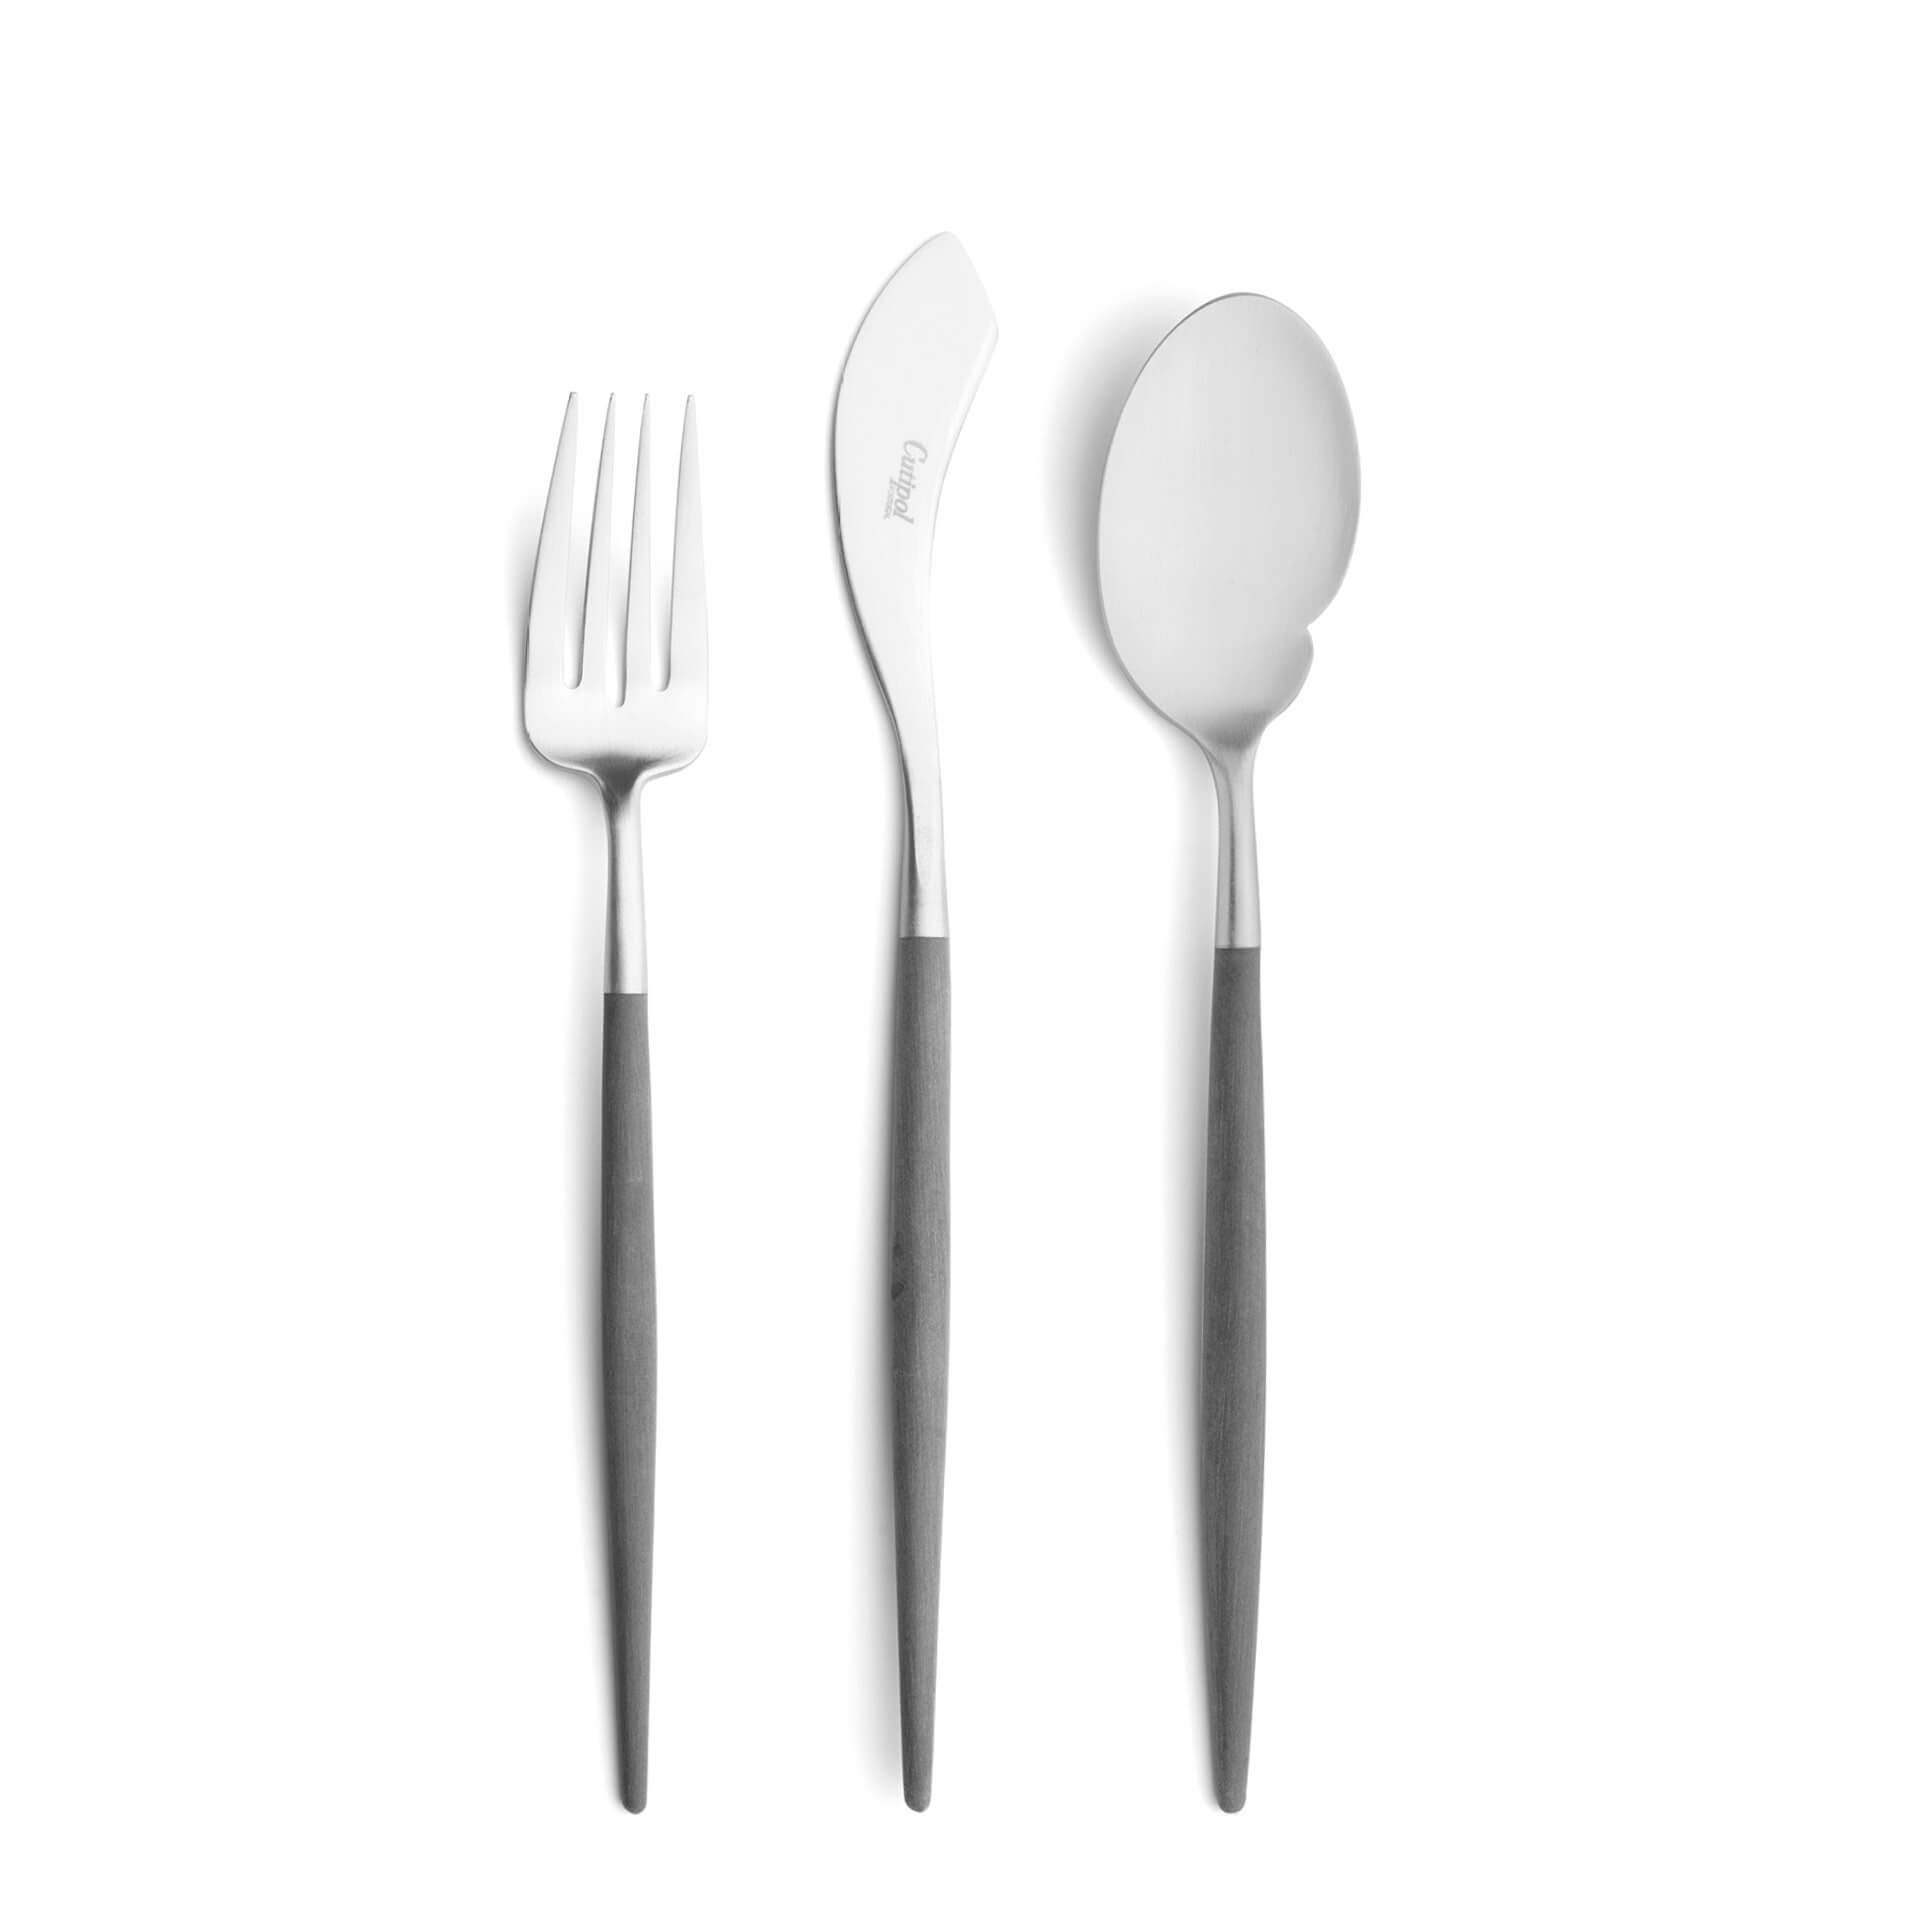 Cutipol Cutlery Goa Grey with fish fork, fish knife and gourmet spoon